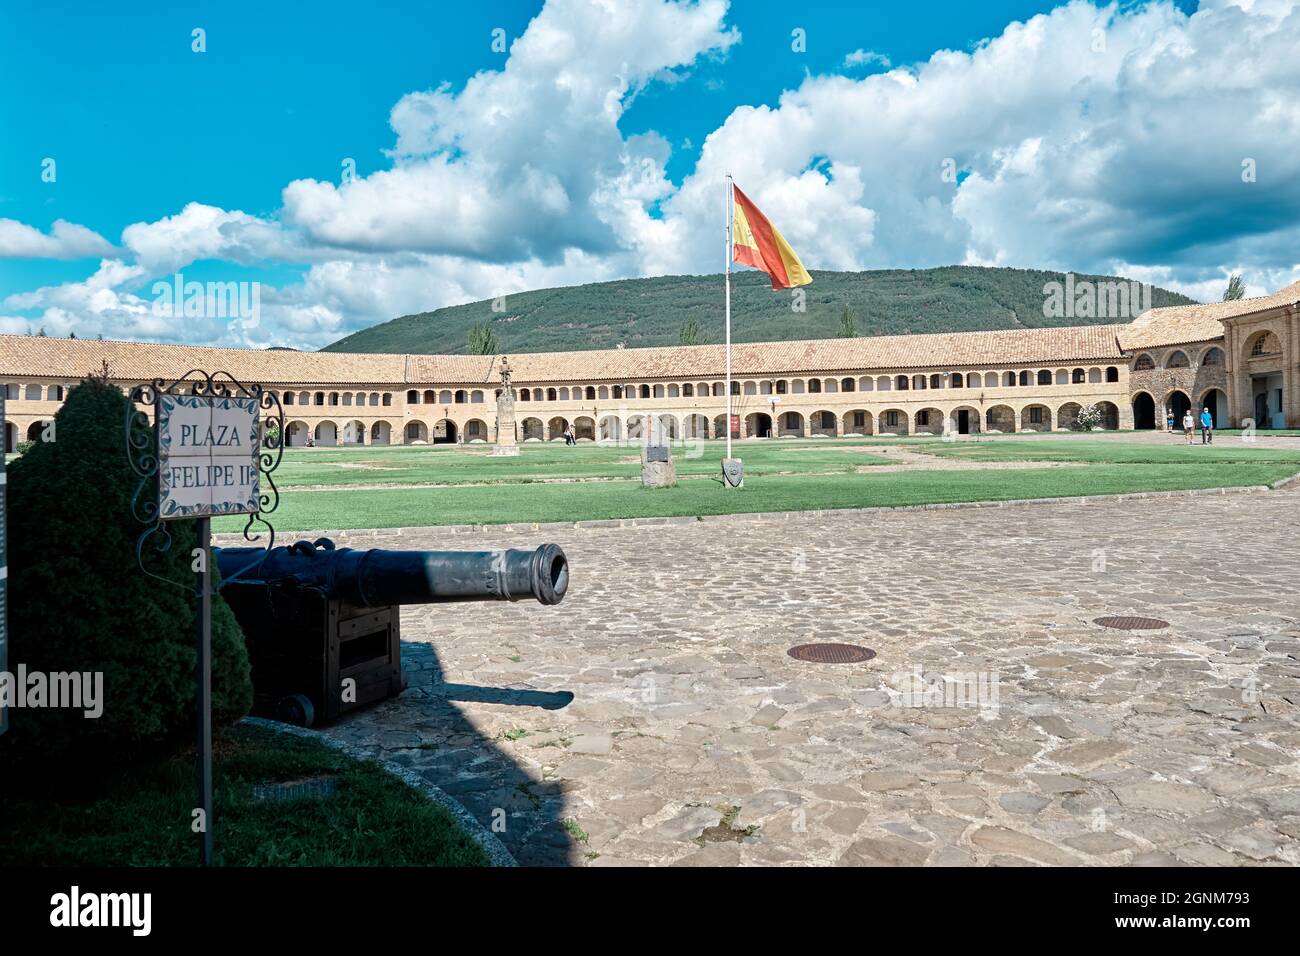 Jaca, Huesca September 10, 2021, Poster 'Plaza Felipe II' with a cannon and the Spanish flag in the background in the citadel of Jaca, military fortif Stock Photo